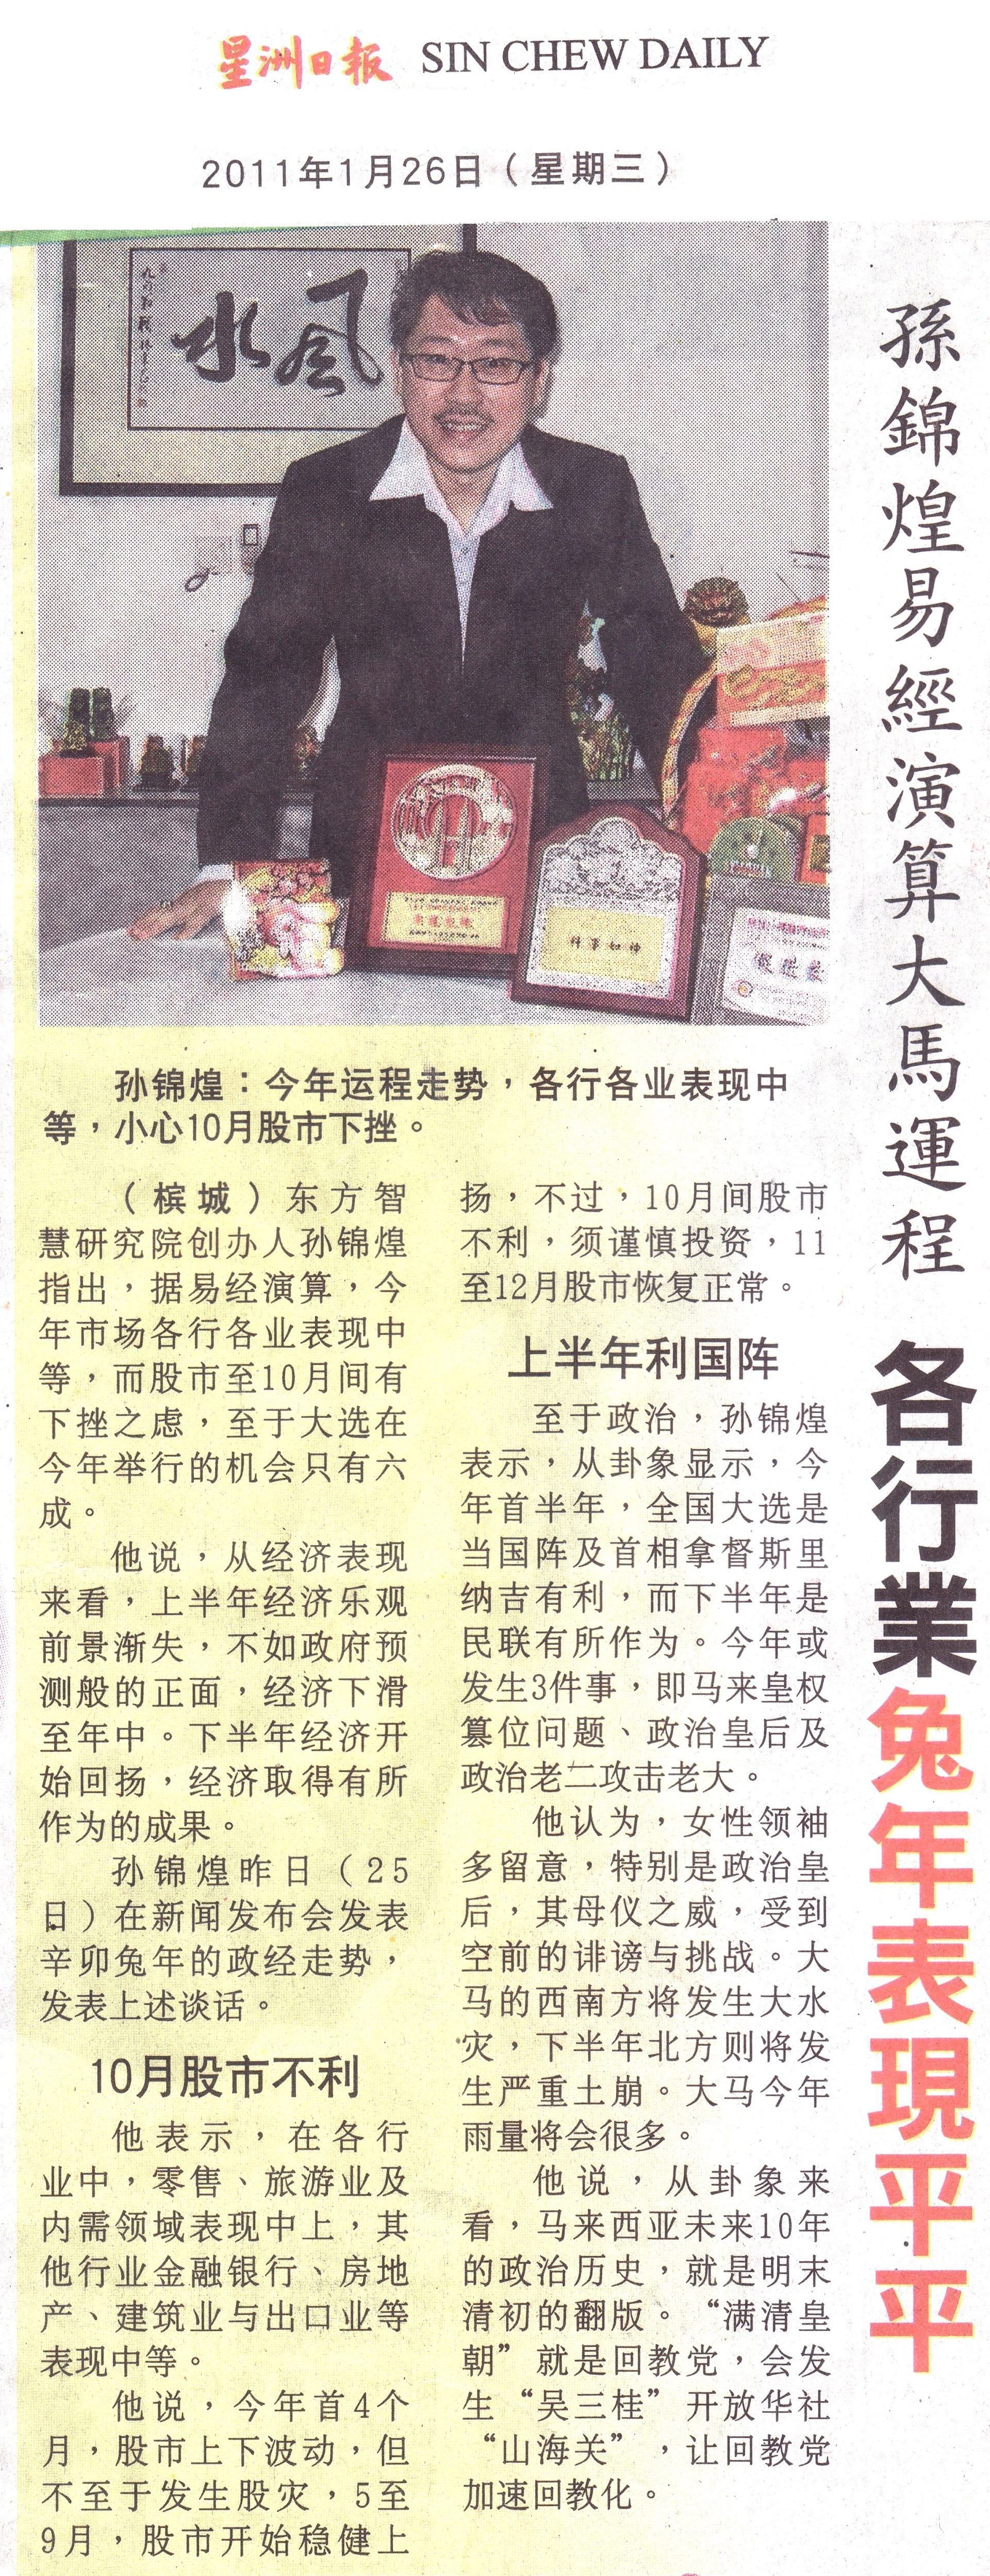 Master Soon By Sin Chew Daily, The Largest Chinese Press In Malaysia.